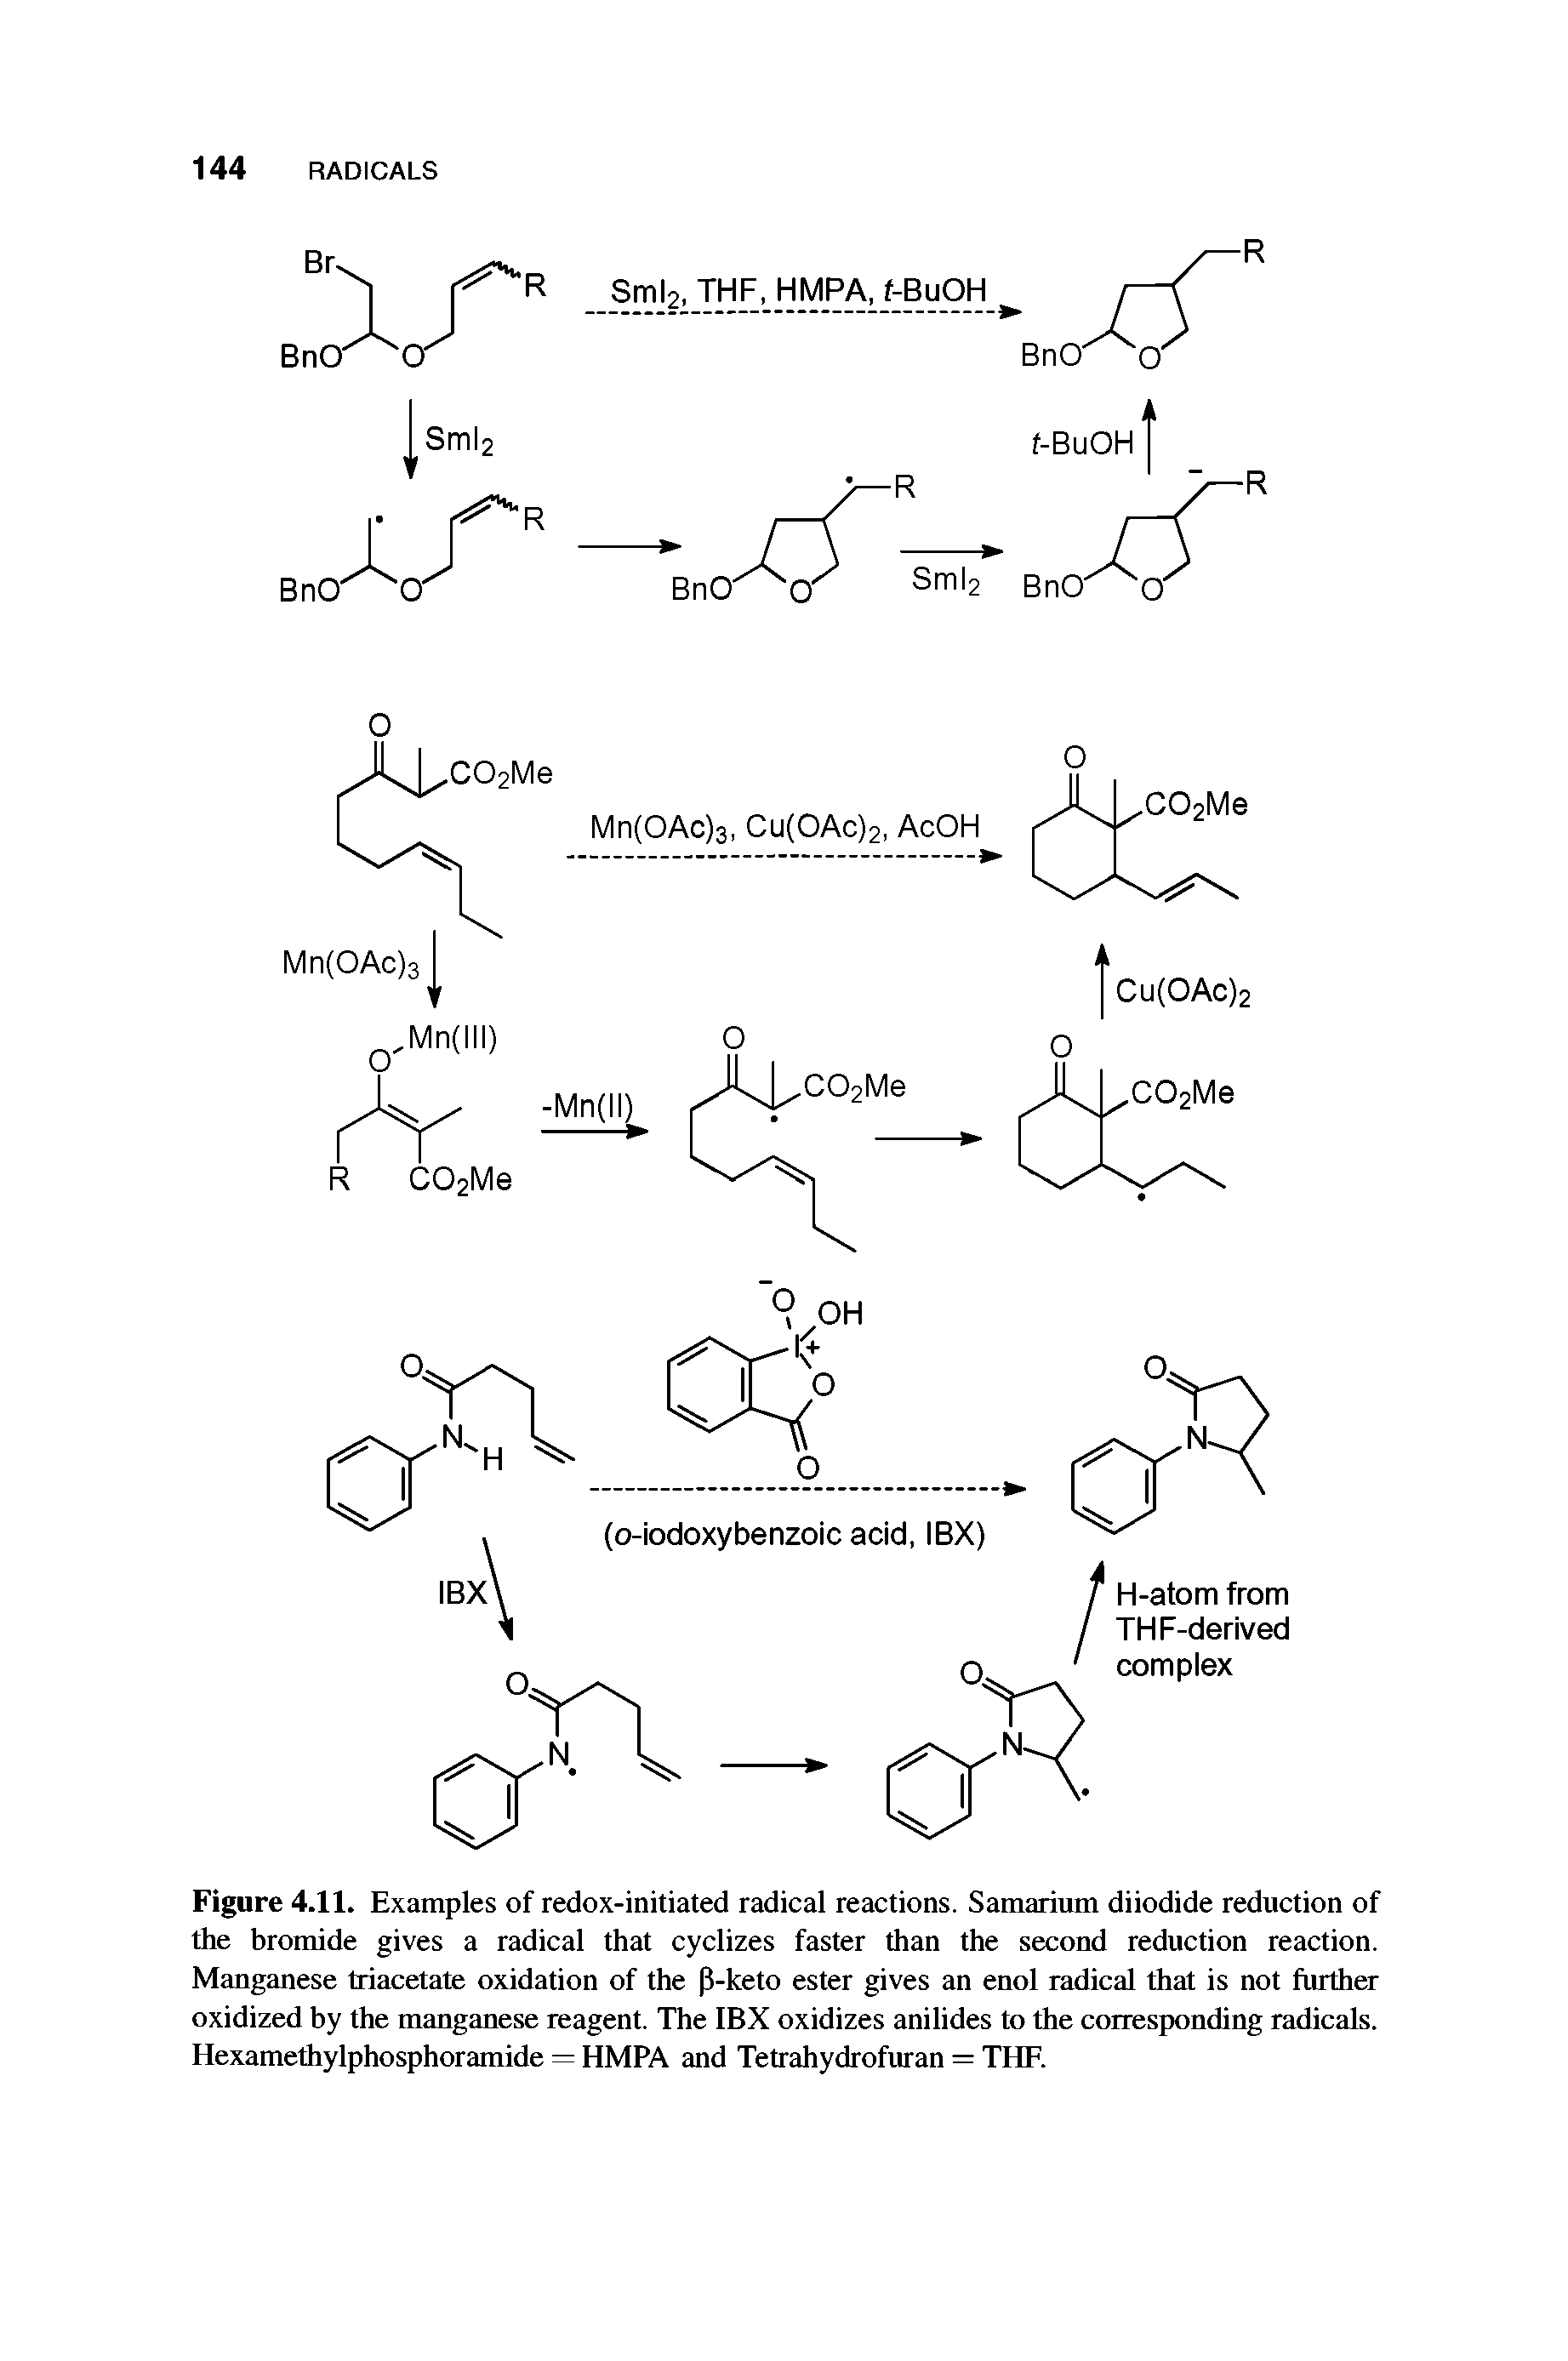 Figure 4.11. Examples of redox-initiated radical reactions. Samarium diiodide reduction of the bromide gives a radical that cyclizes faster than the second reduction reaction. Manganese triacetate oxidation of the P-keto ester gives an enol radical that is not further oxidized by the manganese reagent. The IBX oxidizes anilides to the corresponding radicals. Hexamethylphosphoramide = HMPA and Tetrahydrofuran = THE.